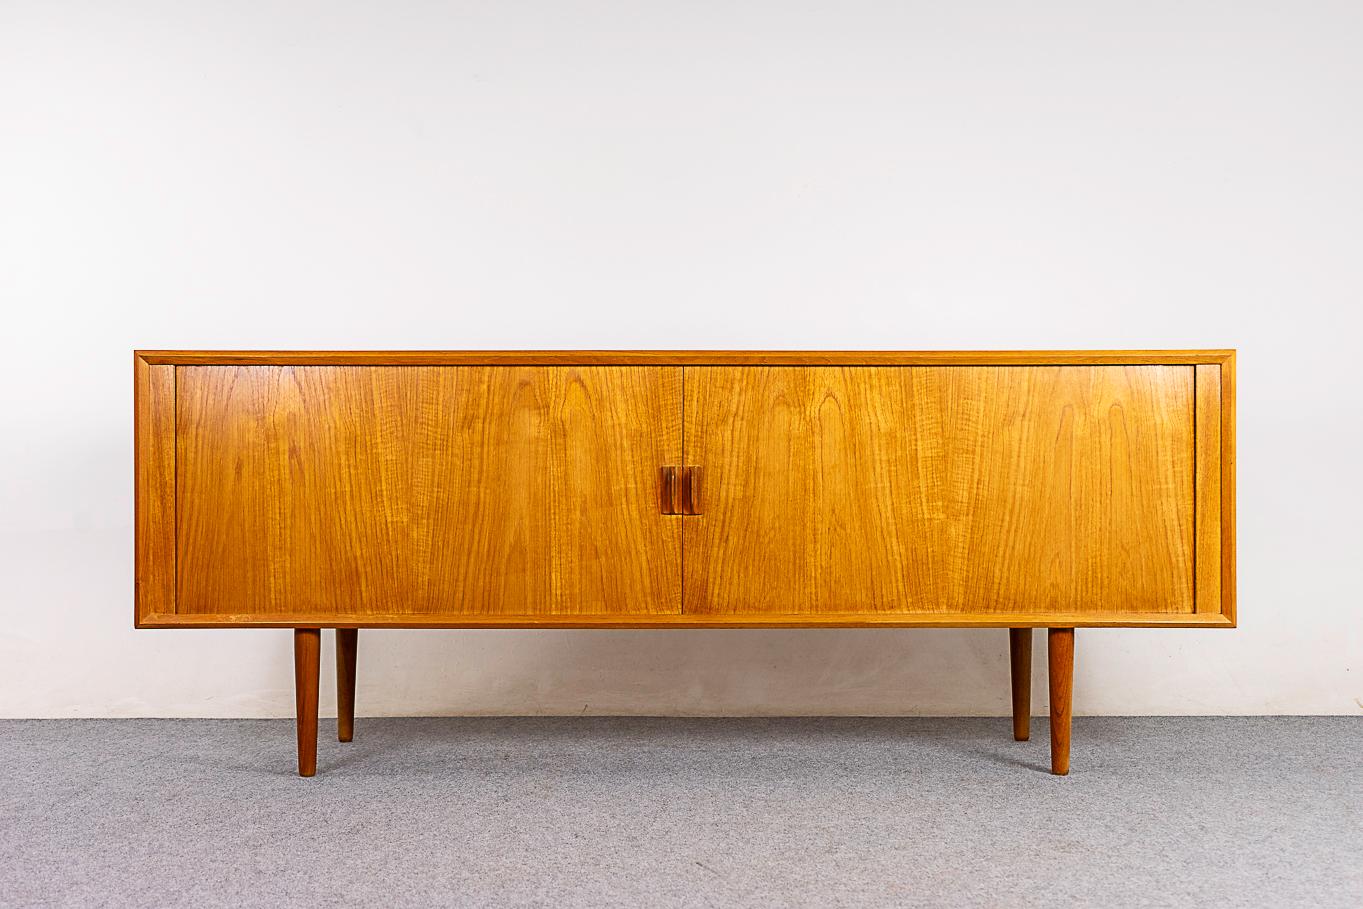 Teak mid-century sideboard, circa 1960's. Beautiful bookmatched veneer, solid wood edging and sleek tapered legs. Magical disappearing tambour doors slide open to provide seamless access to a spacious interior. Height adjustable shelving and slender